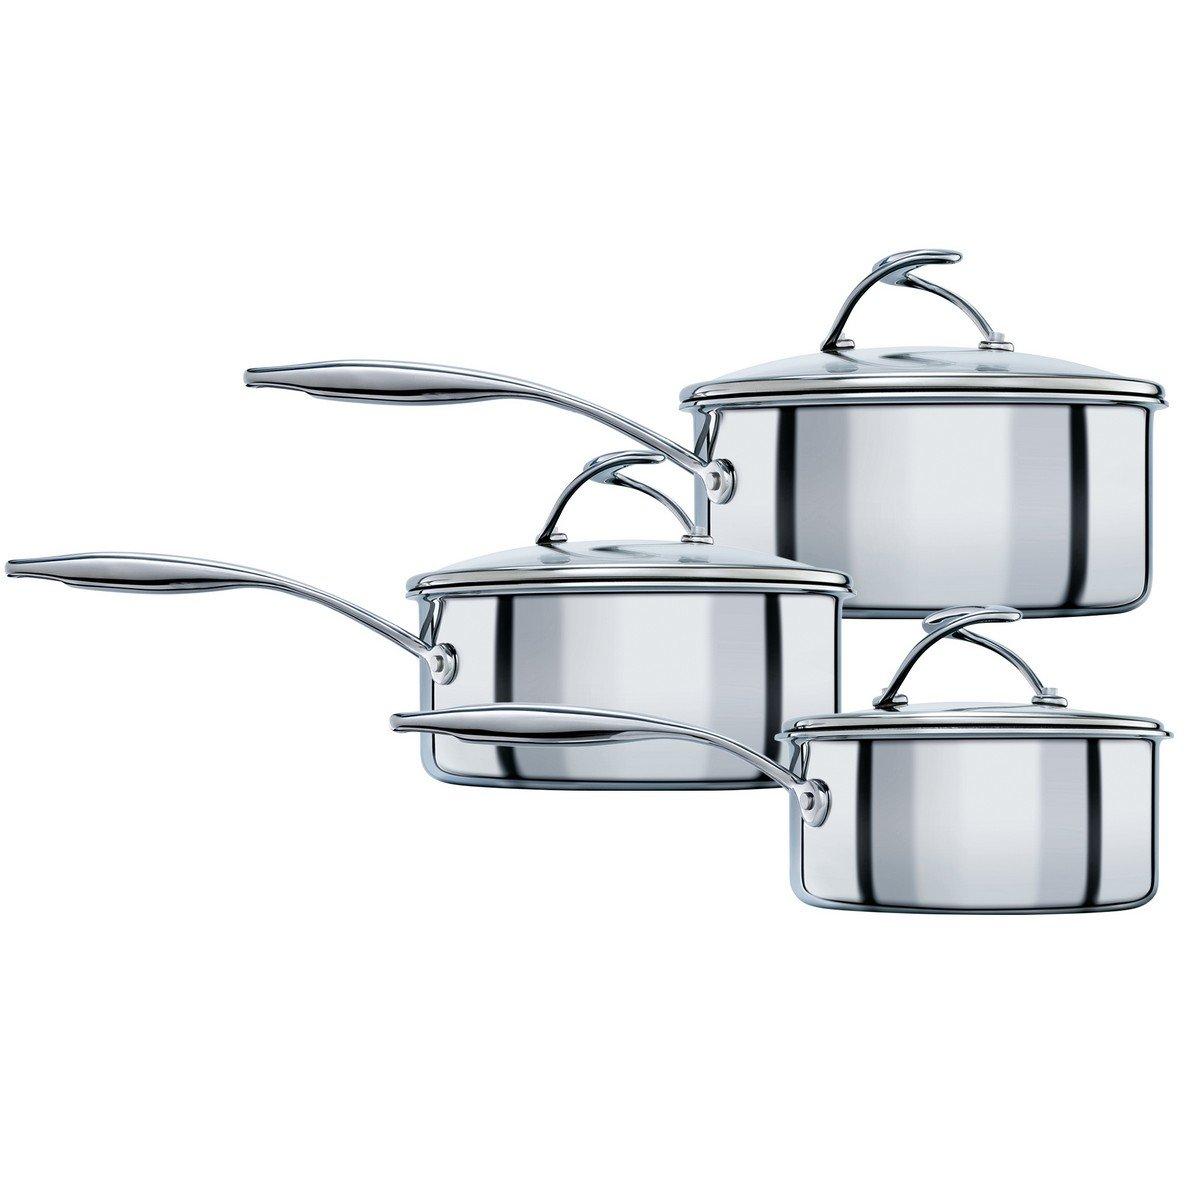 Saucepan Set Stainless Steel - Durable Non Stick Cookware - Pack of 3